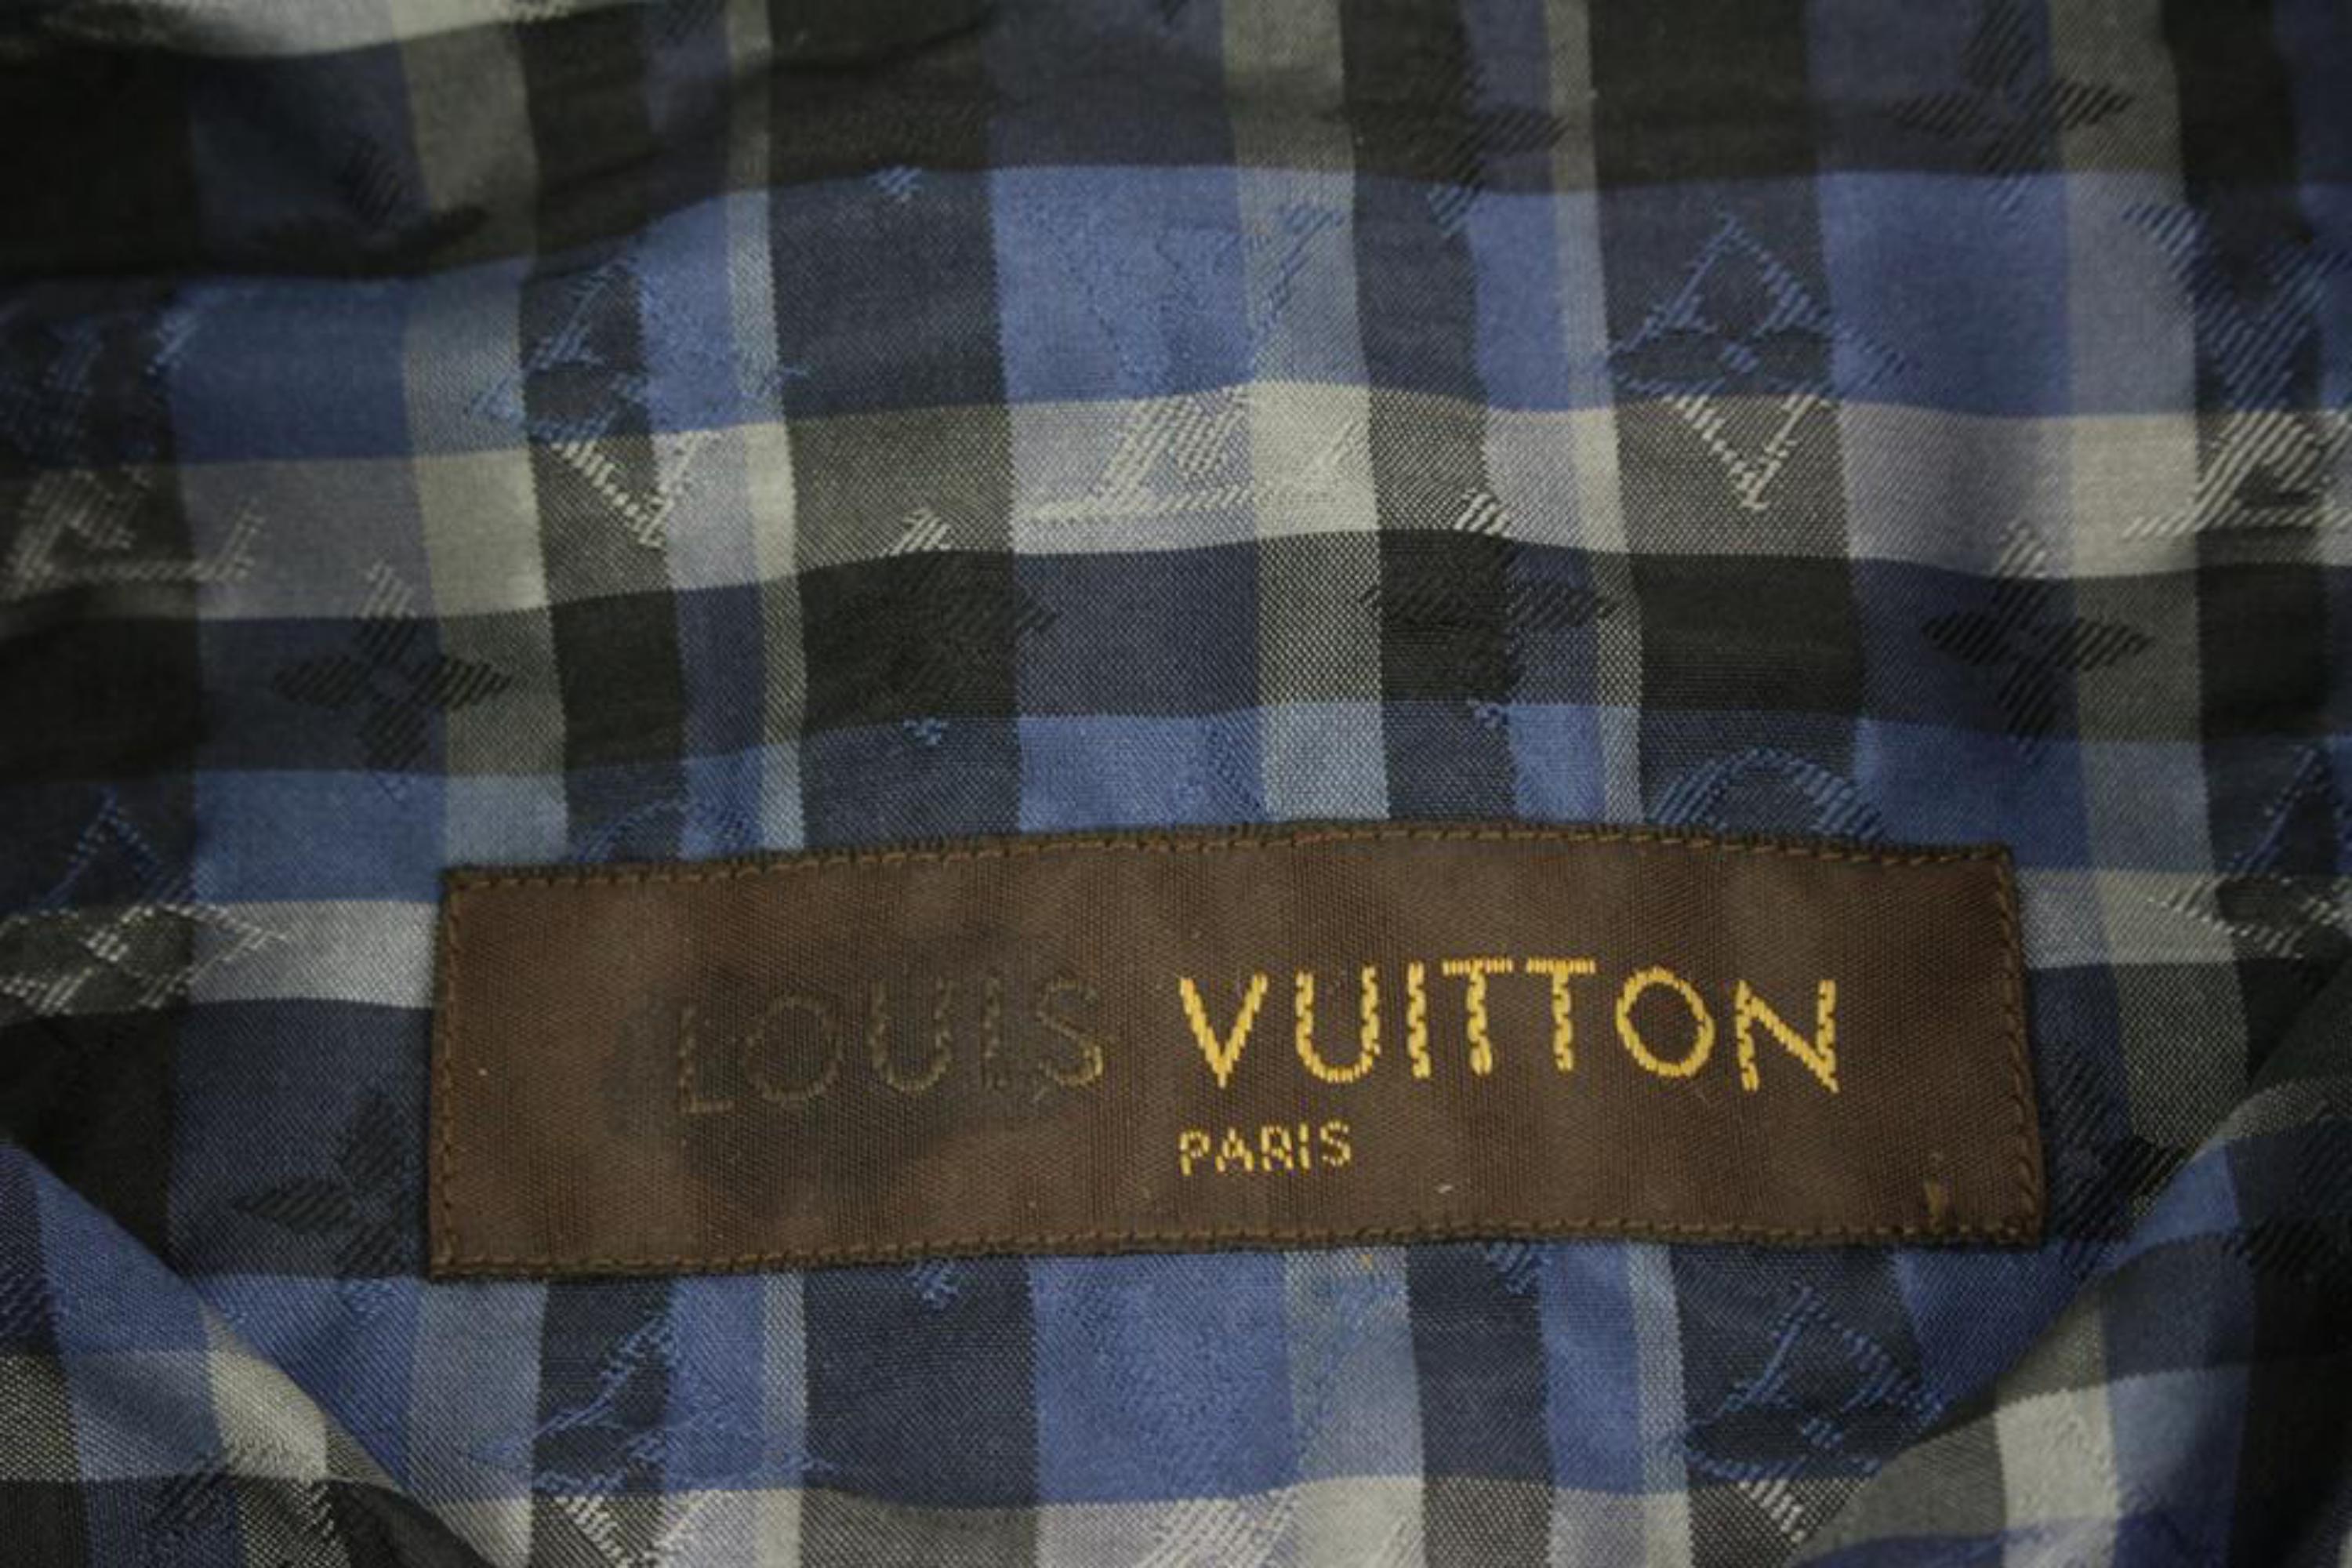 Louis Vuitton Mens Long Sleeve Shirt - 2 For Sale on 1stDibs